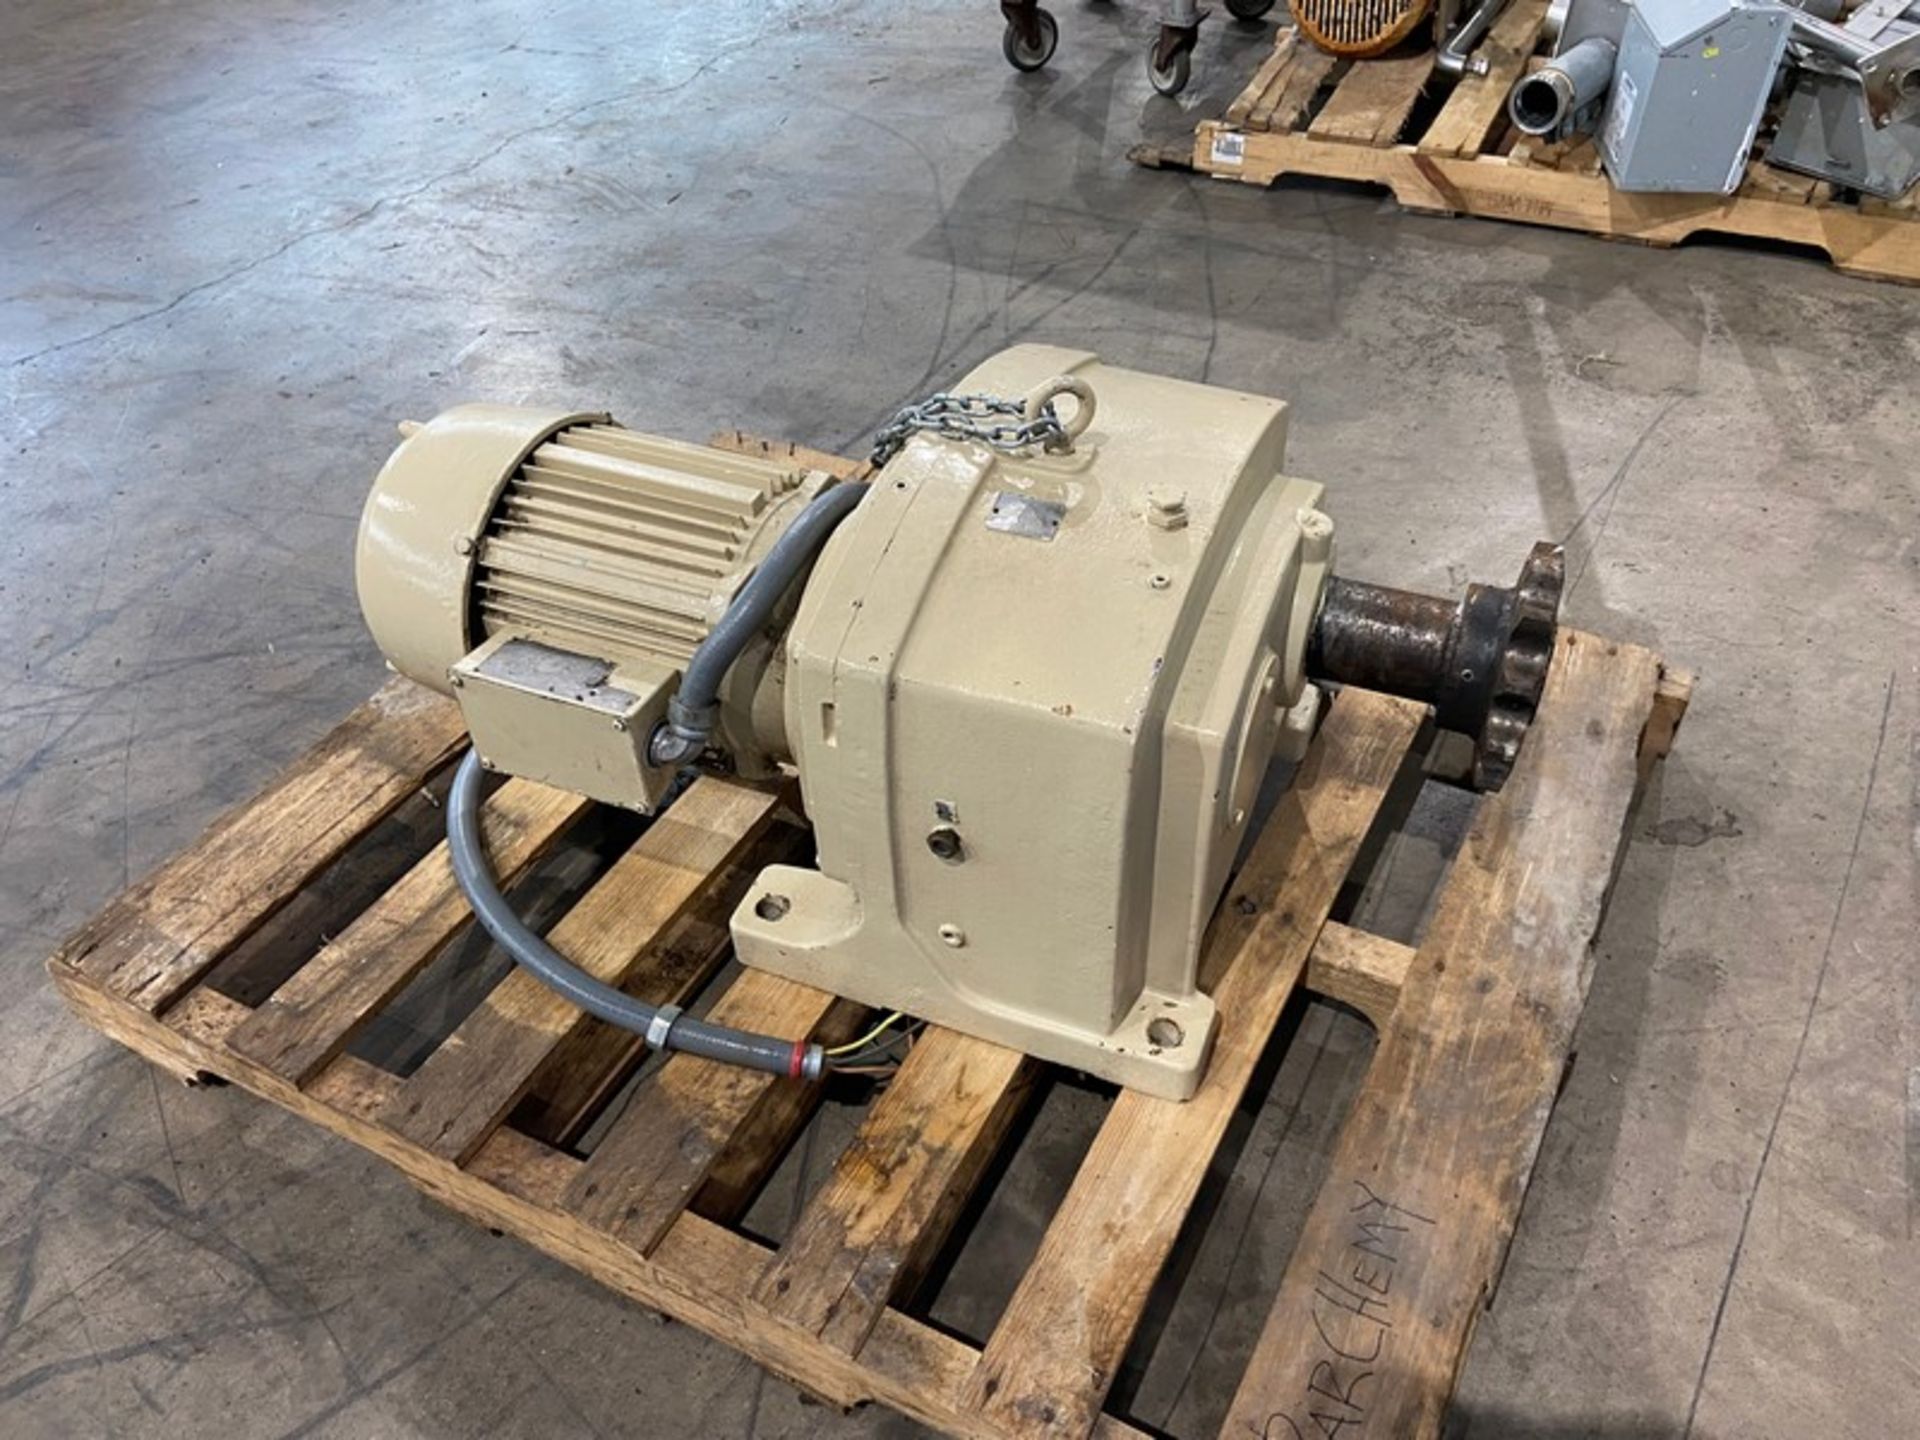 U.S. Electric 10 hp Drive,230/460 Volts, 3 Phase (INV#97183) (Located @ the MDG Auction Showroom 2.0 - Image 3 of 12